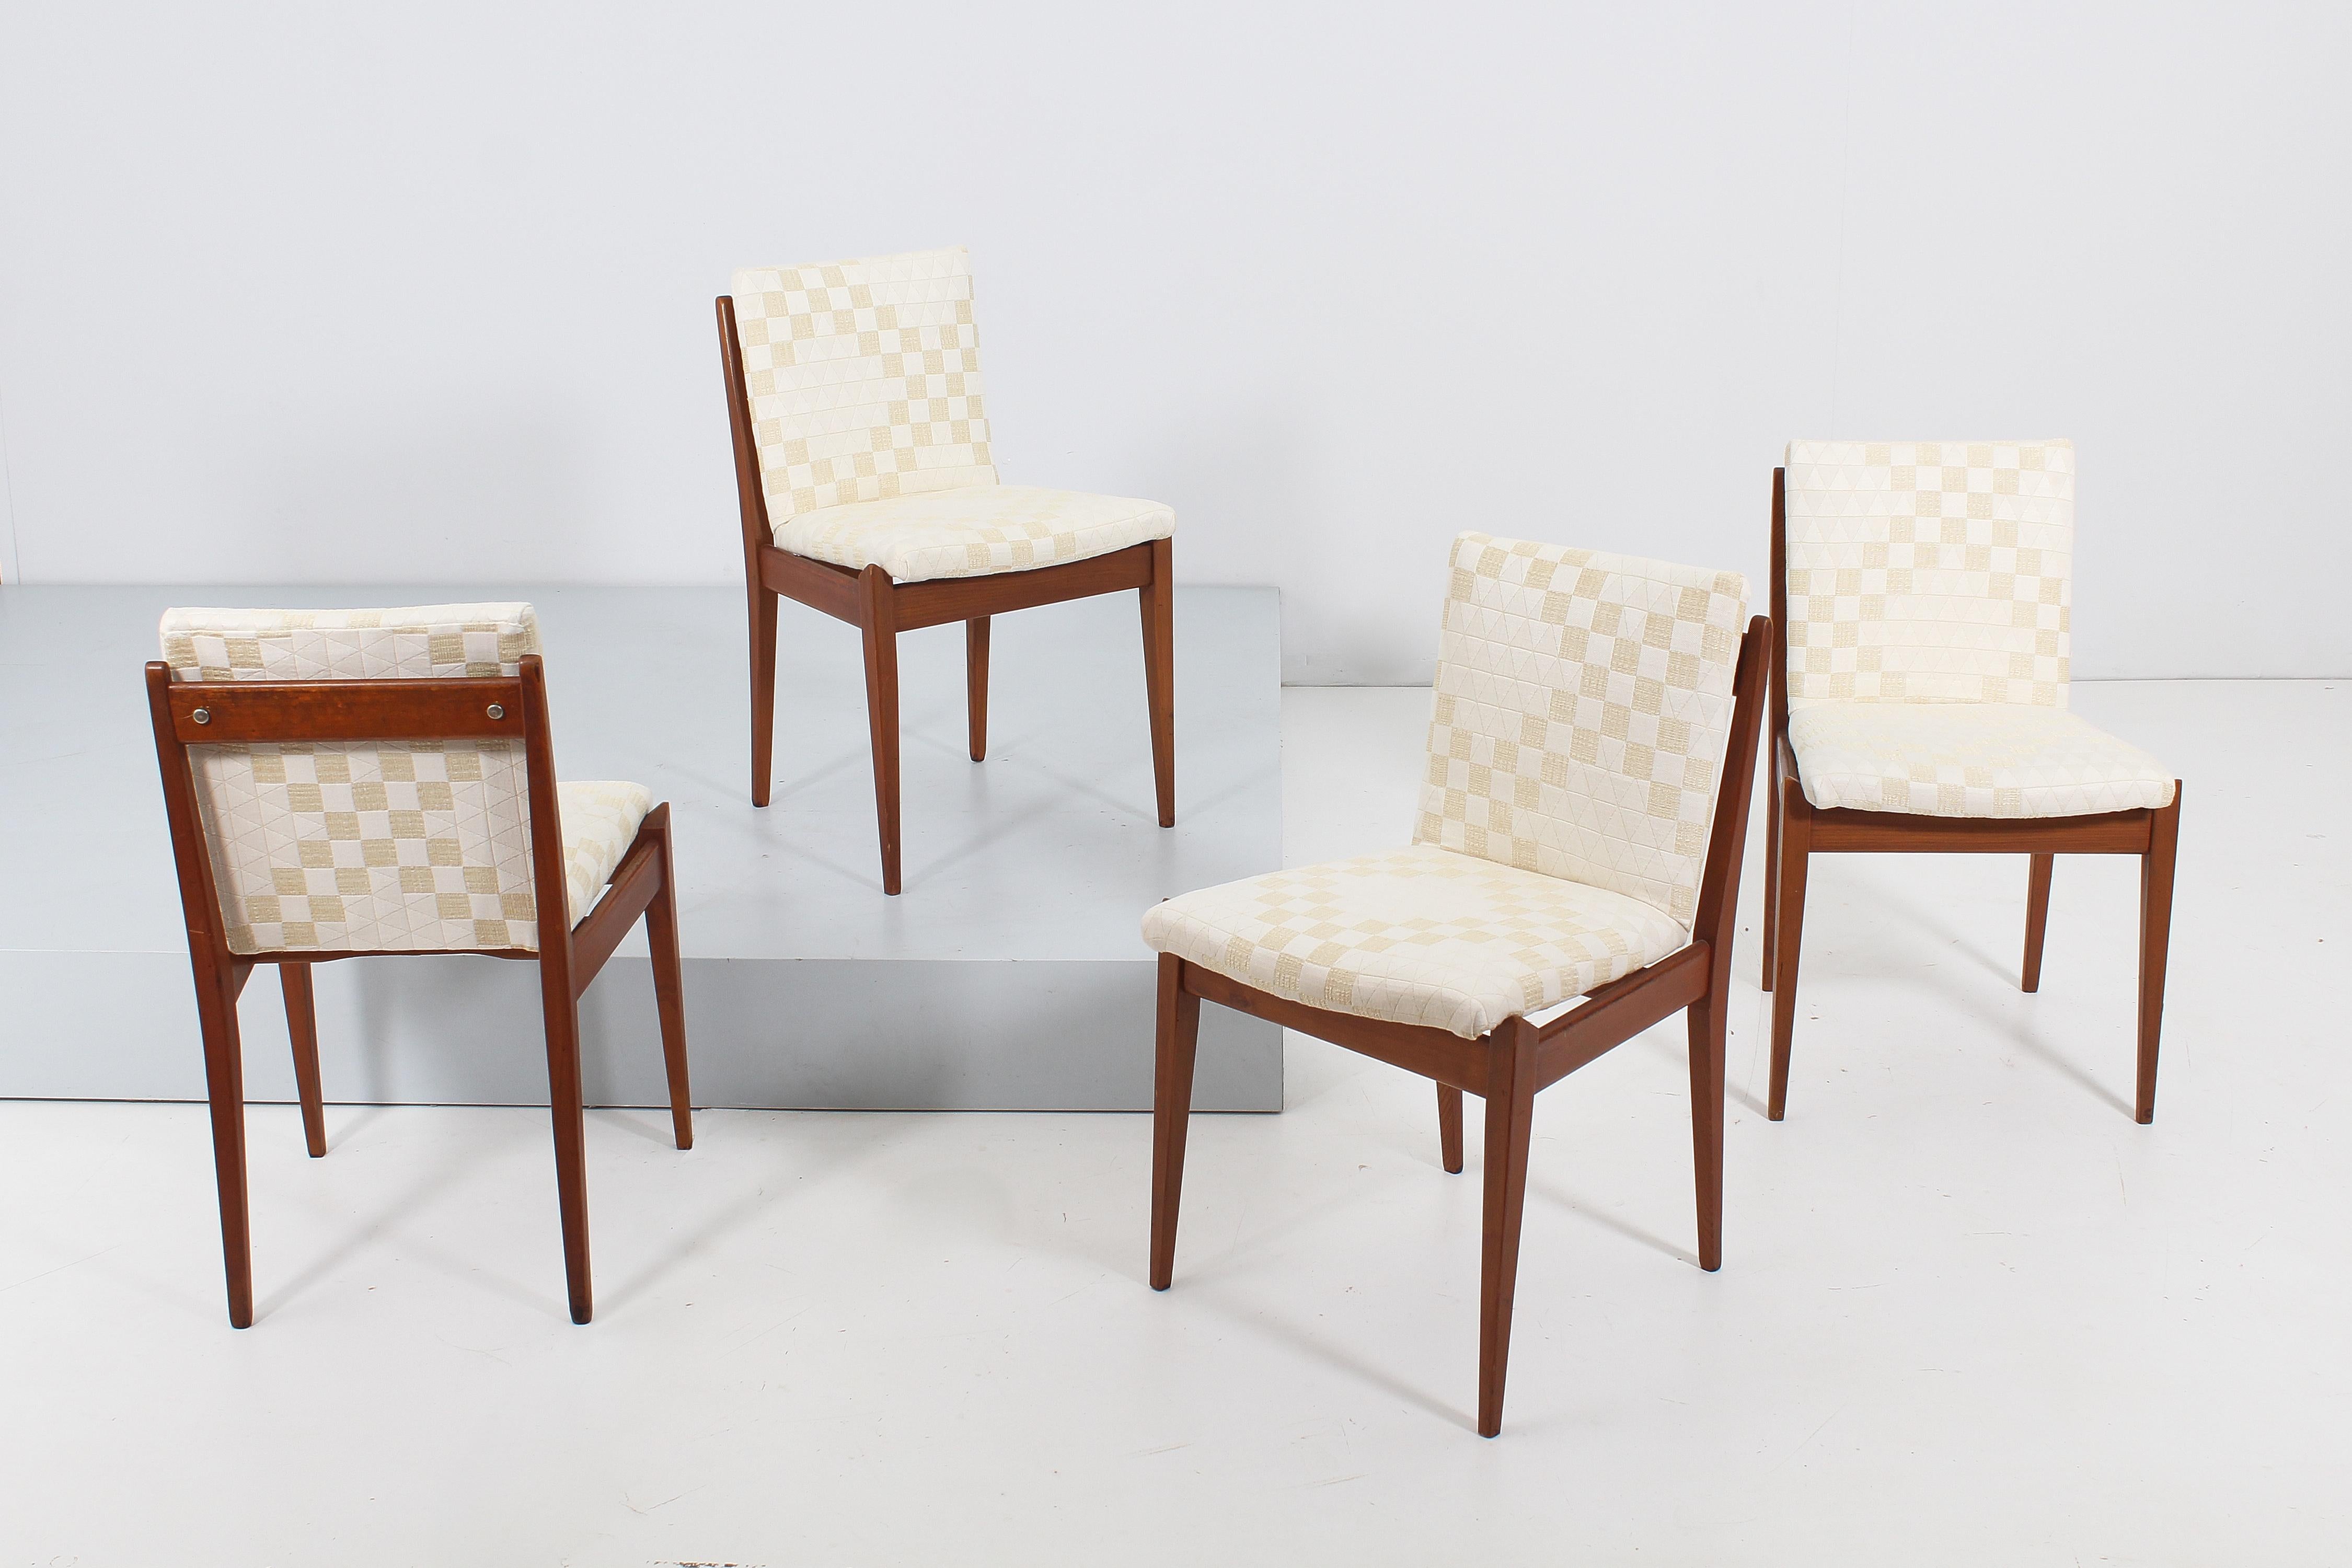 Wonderful and elegant set of four chairs with a harmonious and geometric design with shaped and wood structure and padding covered in creamy white fabric, by ISA Bergamo, Italy in the 1960s.

 